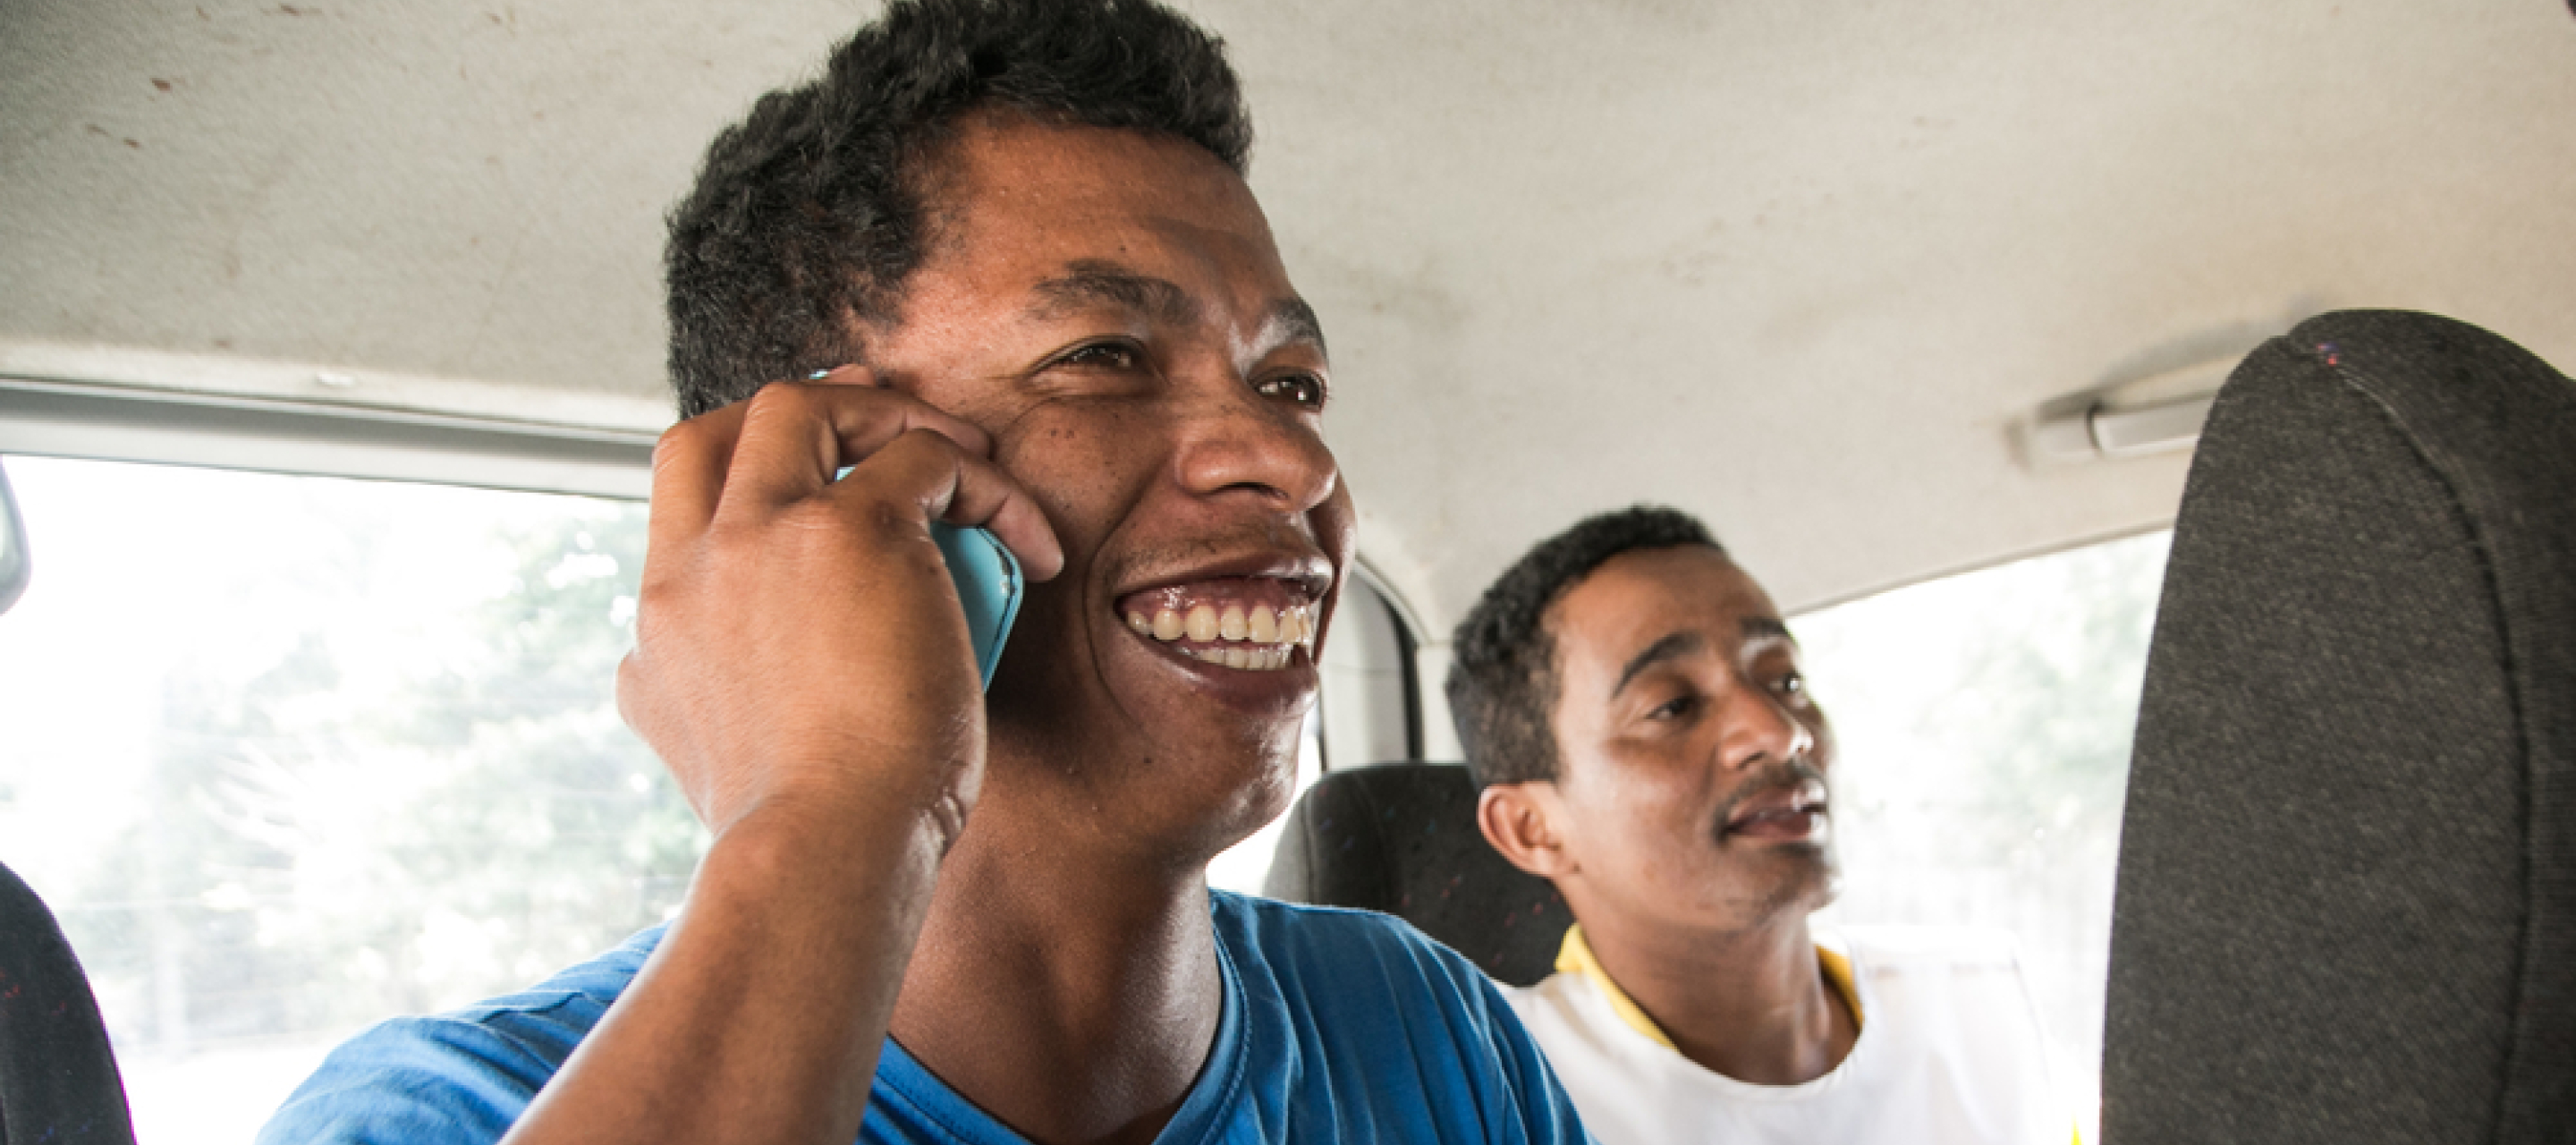 TOAMASINA, MADAGASCAR - Andrinjaka RAFAMANTANANTSOA (left), 28, was just released from the plague triage and treatment centre where had been cared for since 11 October. ANDRINJAKA is a mason. Due to fears of being rejected by his boss and his coworkers, he has asked the MSF Health Promoters to come with him to his workplace in order to meet them and explain them that he’s no longer a danger to his team. ANDRINJAKA greets them one last time.